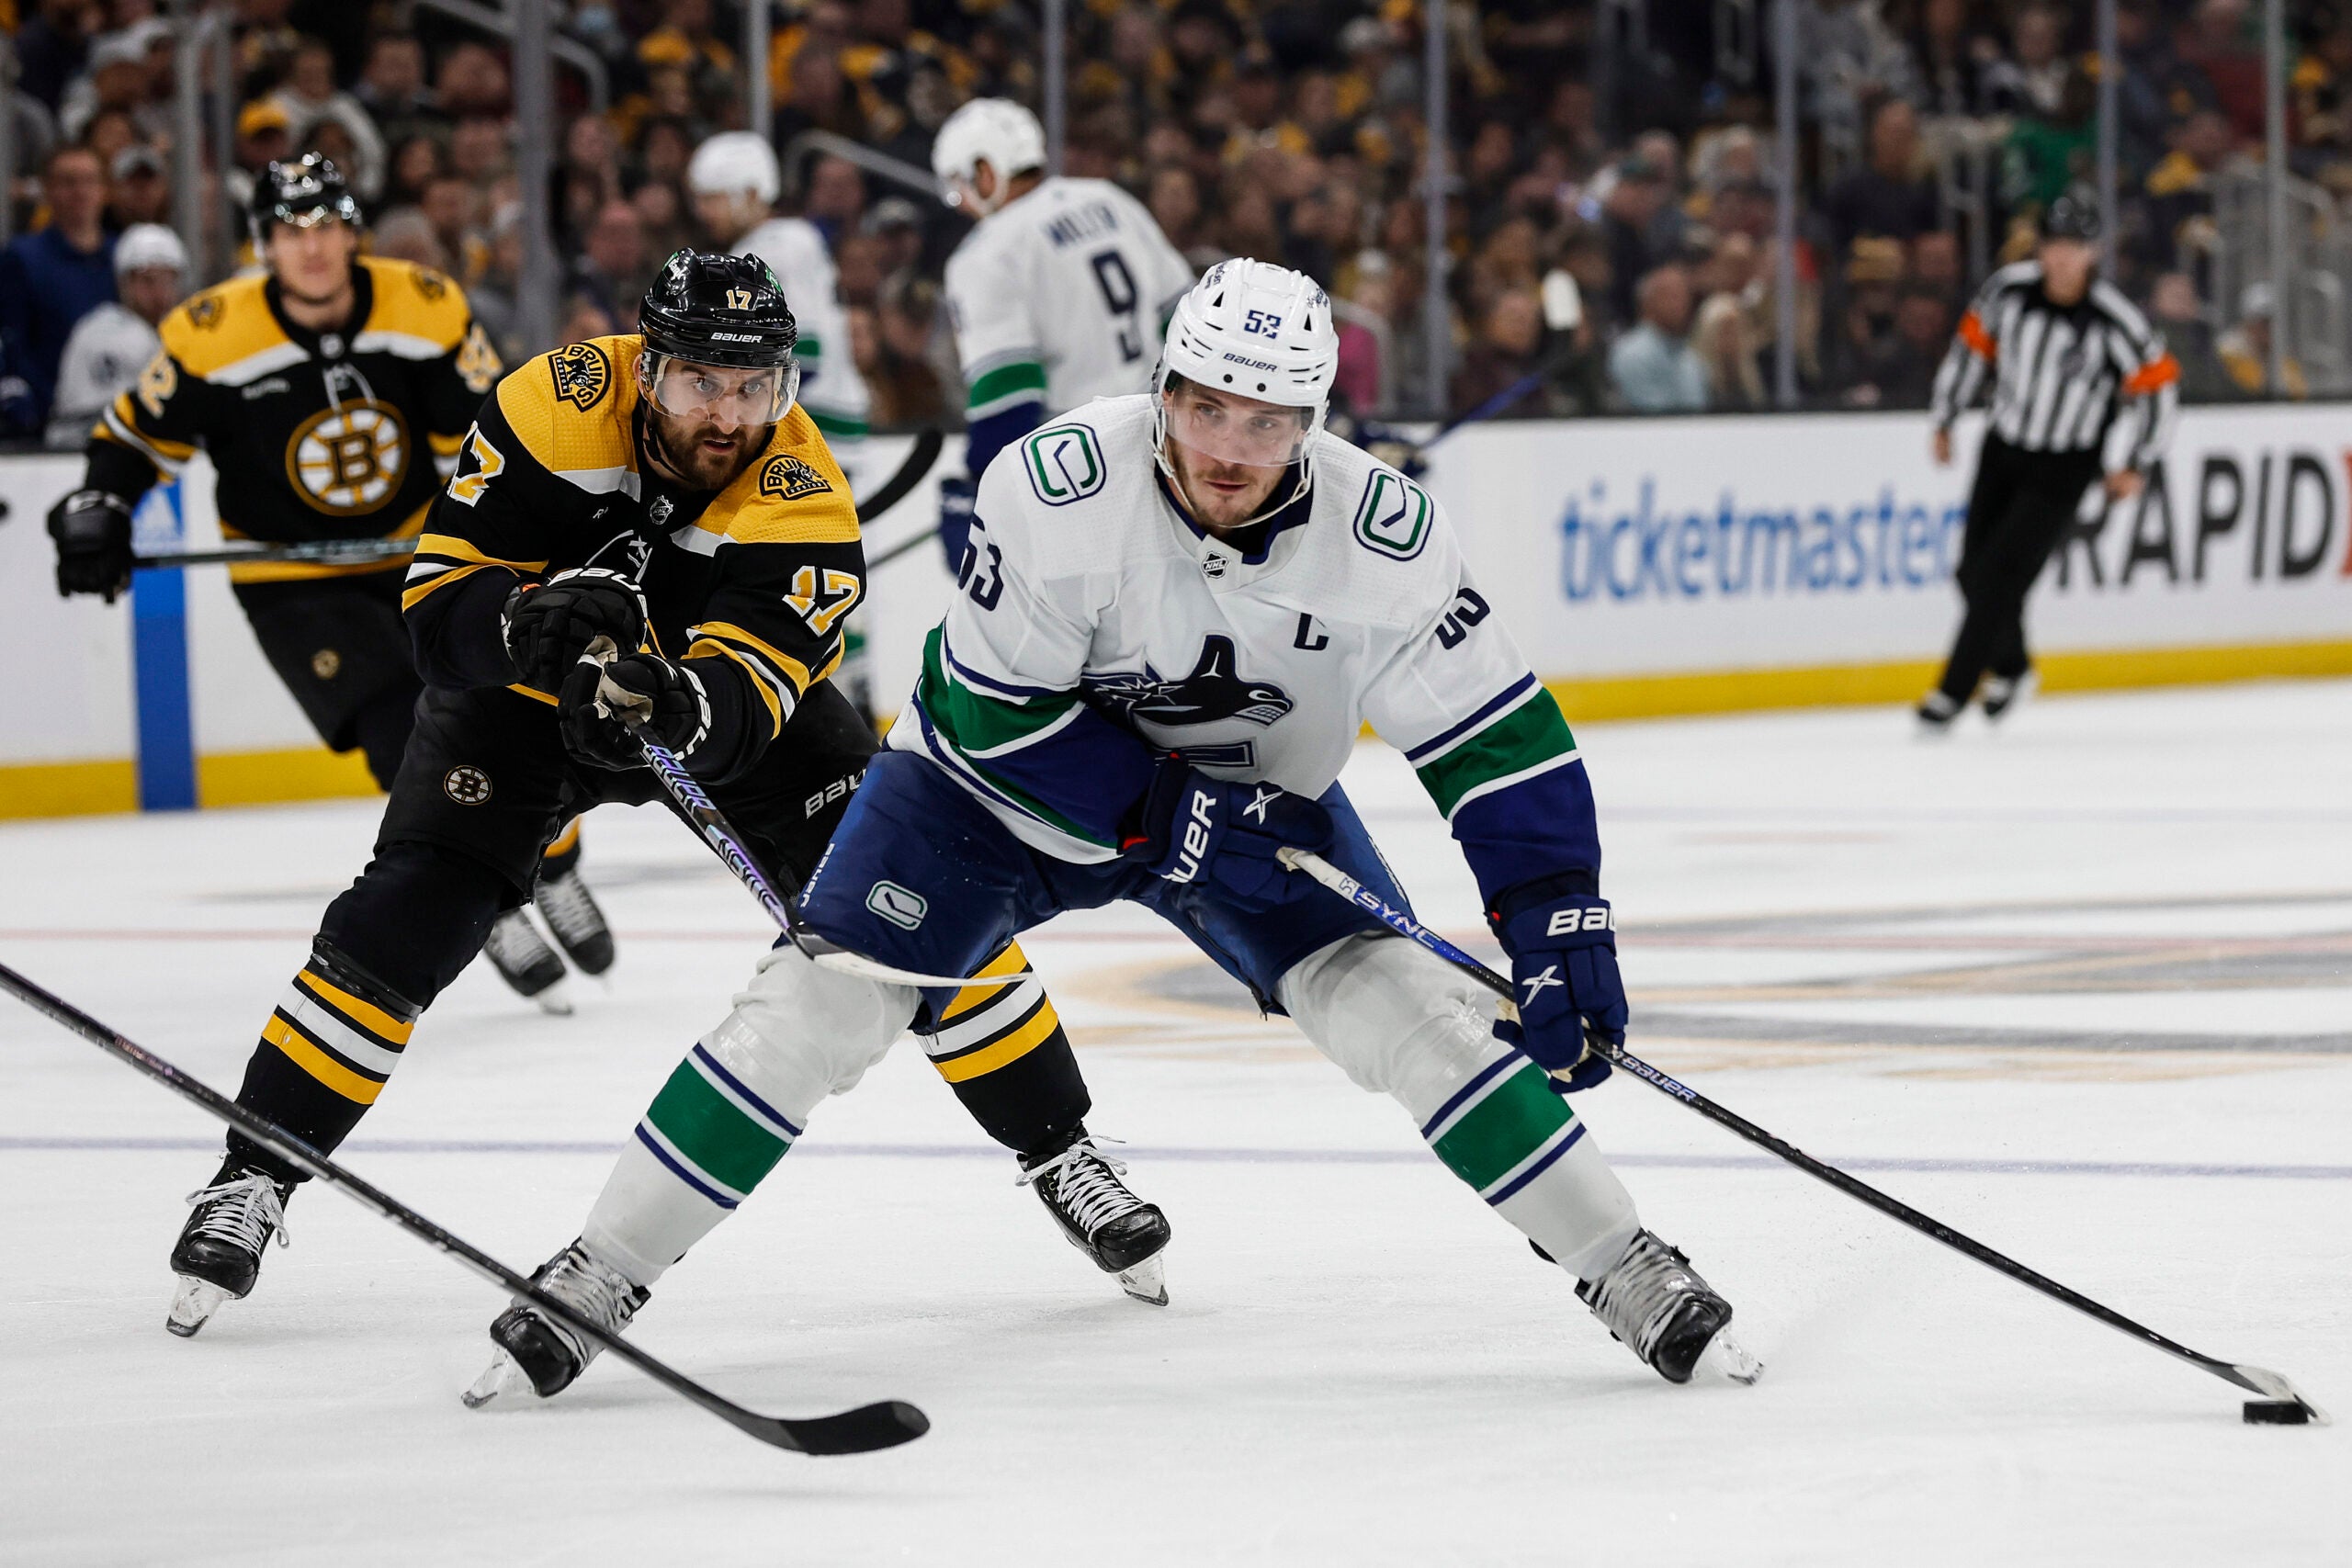 Boston Bruins' Nick Foligno (17) tries to slow down Vancouver Canucks' Bo Horvat during the third period of an NHL hockey game Sunday, Nov. 13, 2022, in Boston.